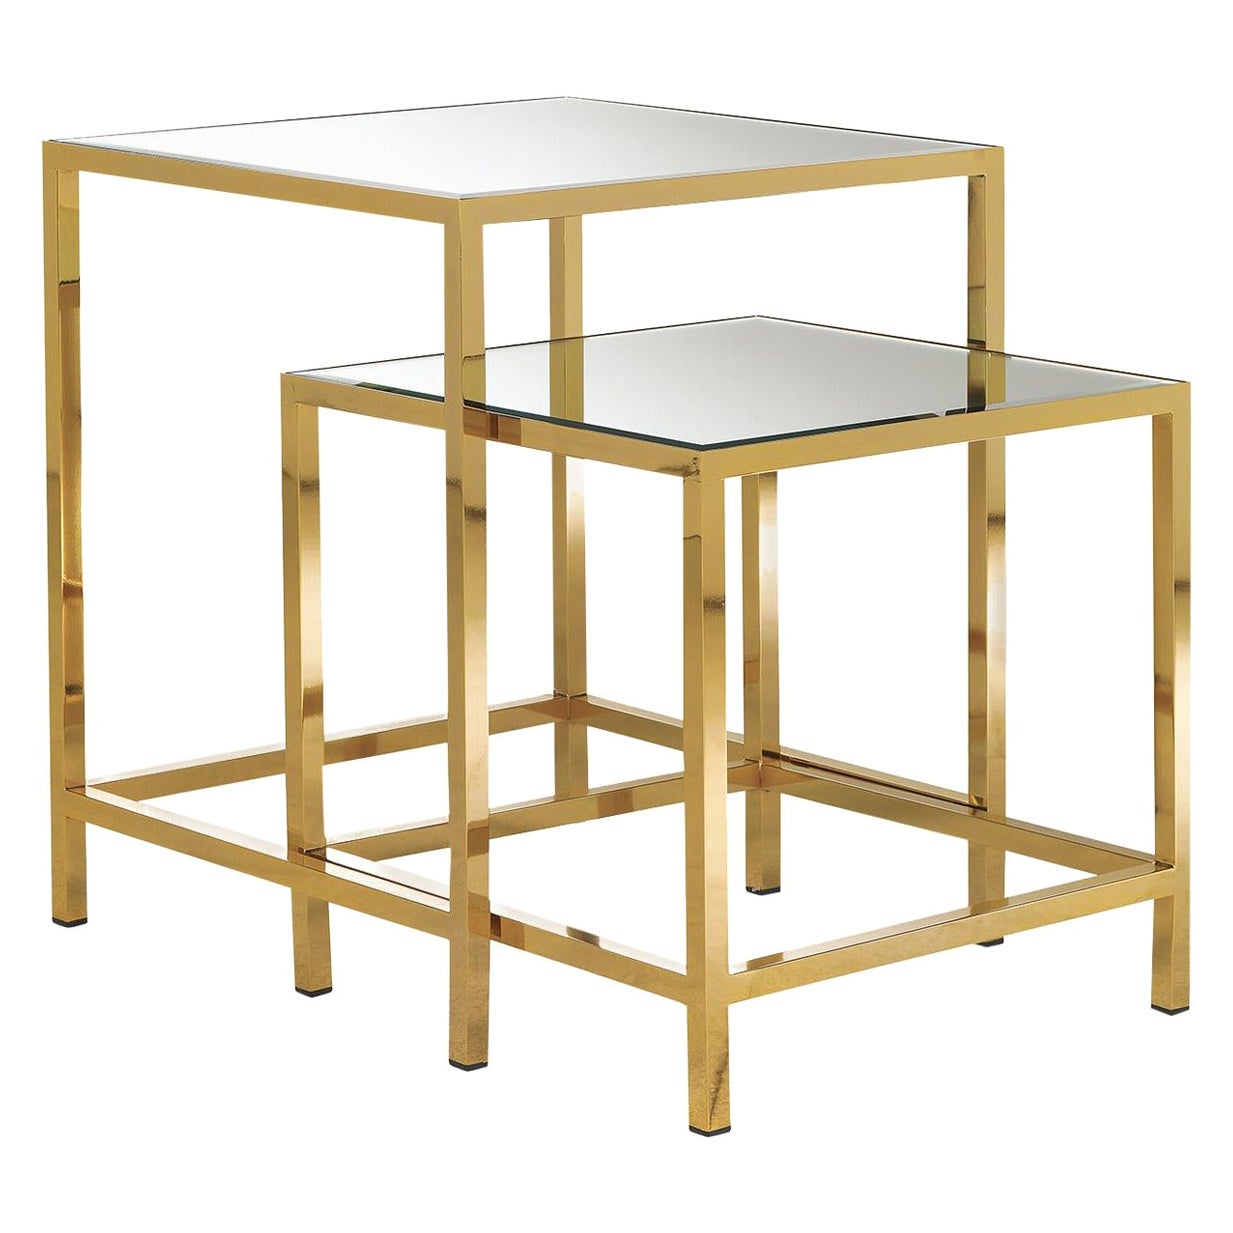 Set of 2 Nesting Tables with Mirror